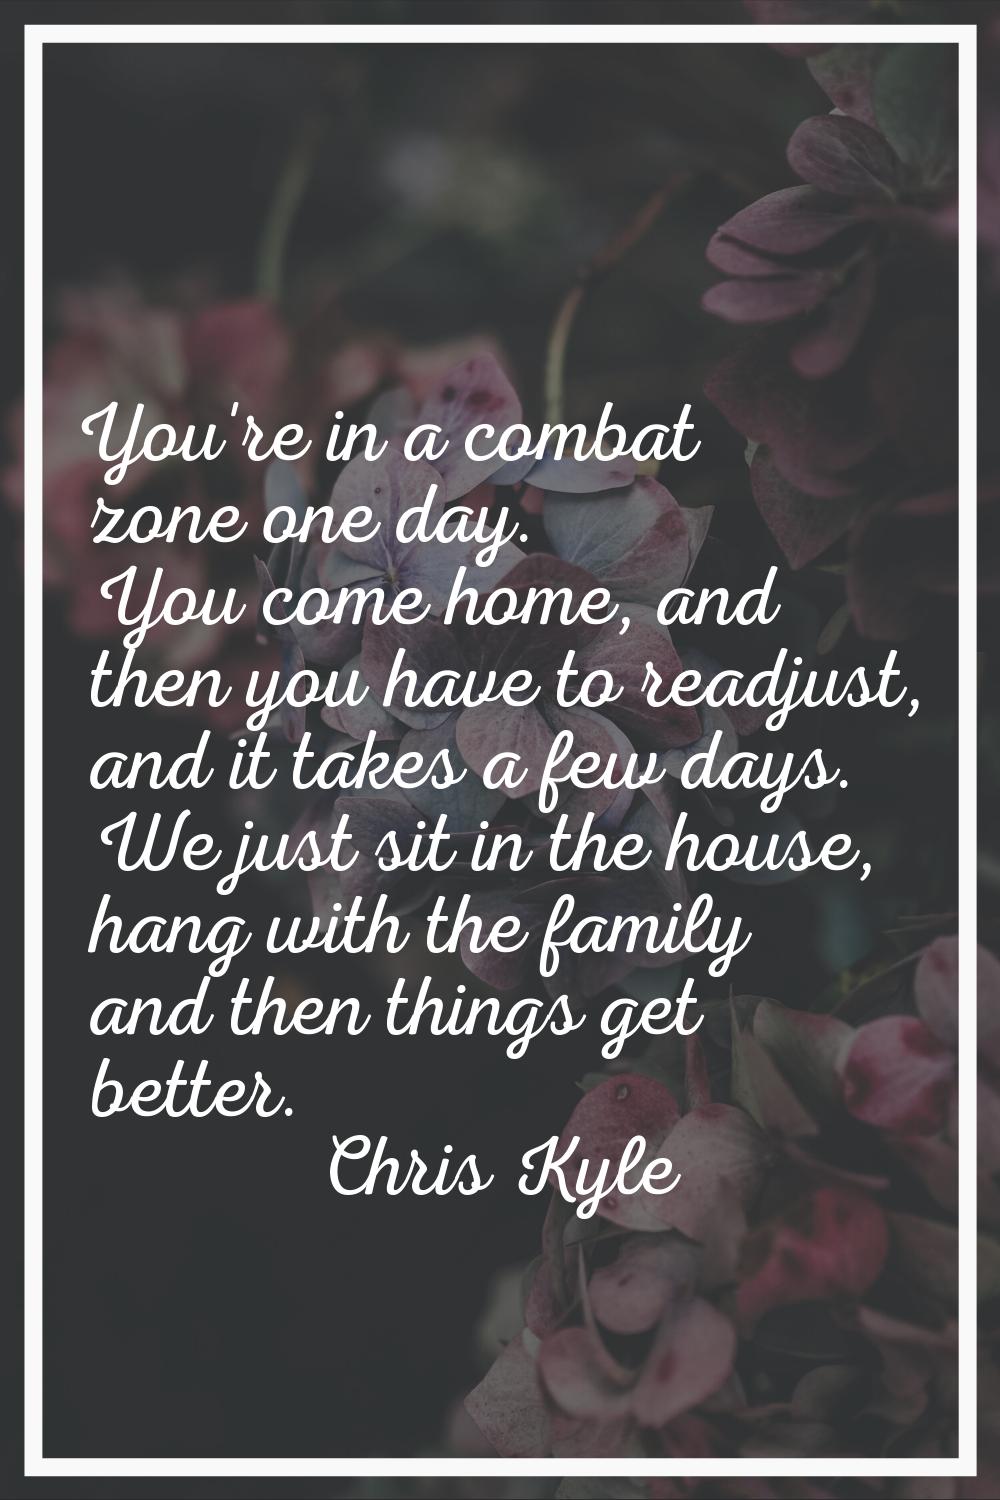 You're in a combat zone one day. You come home, and then you have to readjust, and it takes a few d